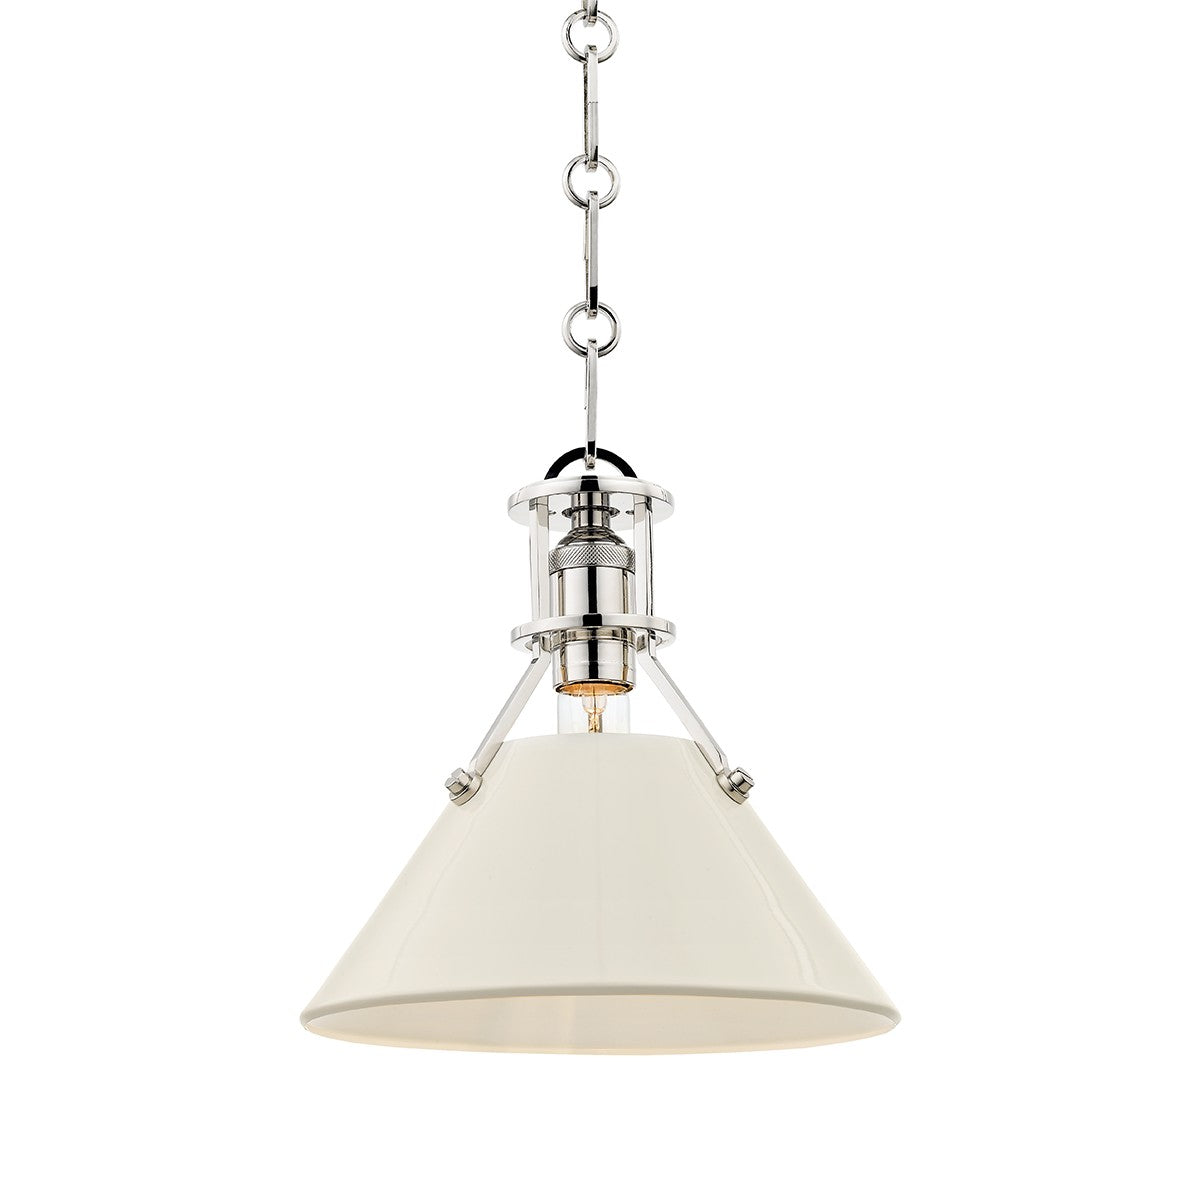 Hudson Valley - MDS351-PN/OW - One Light Pendant - Painted No.2 - Polished Nickel/Off White